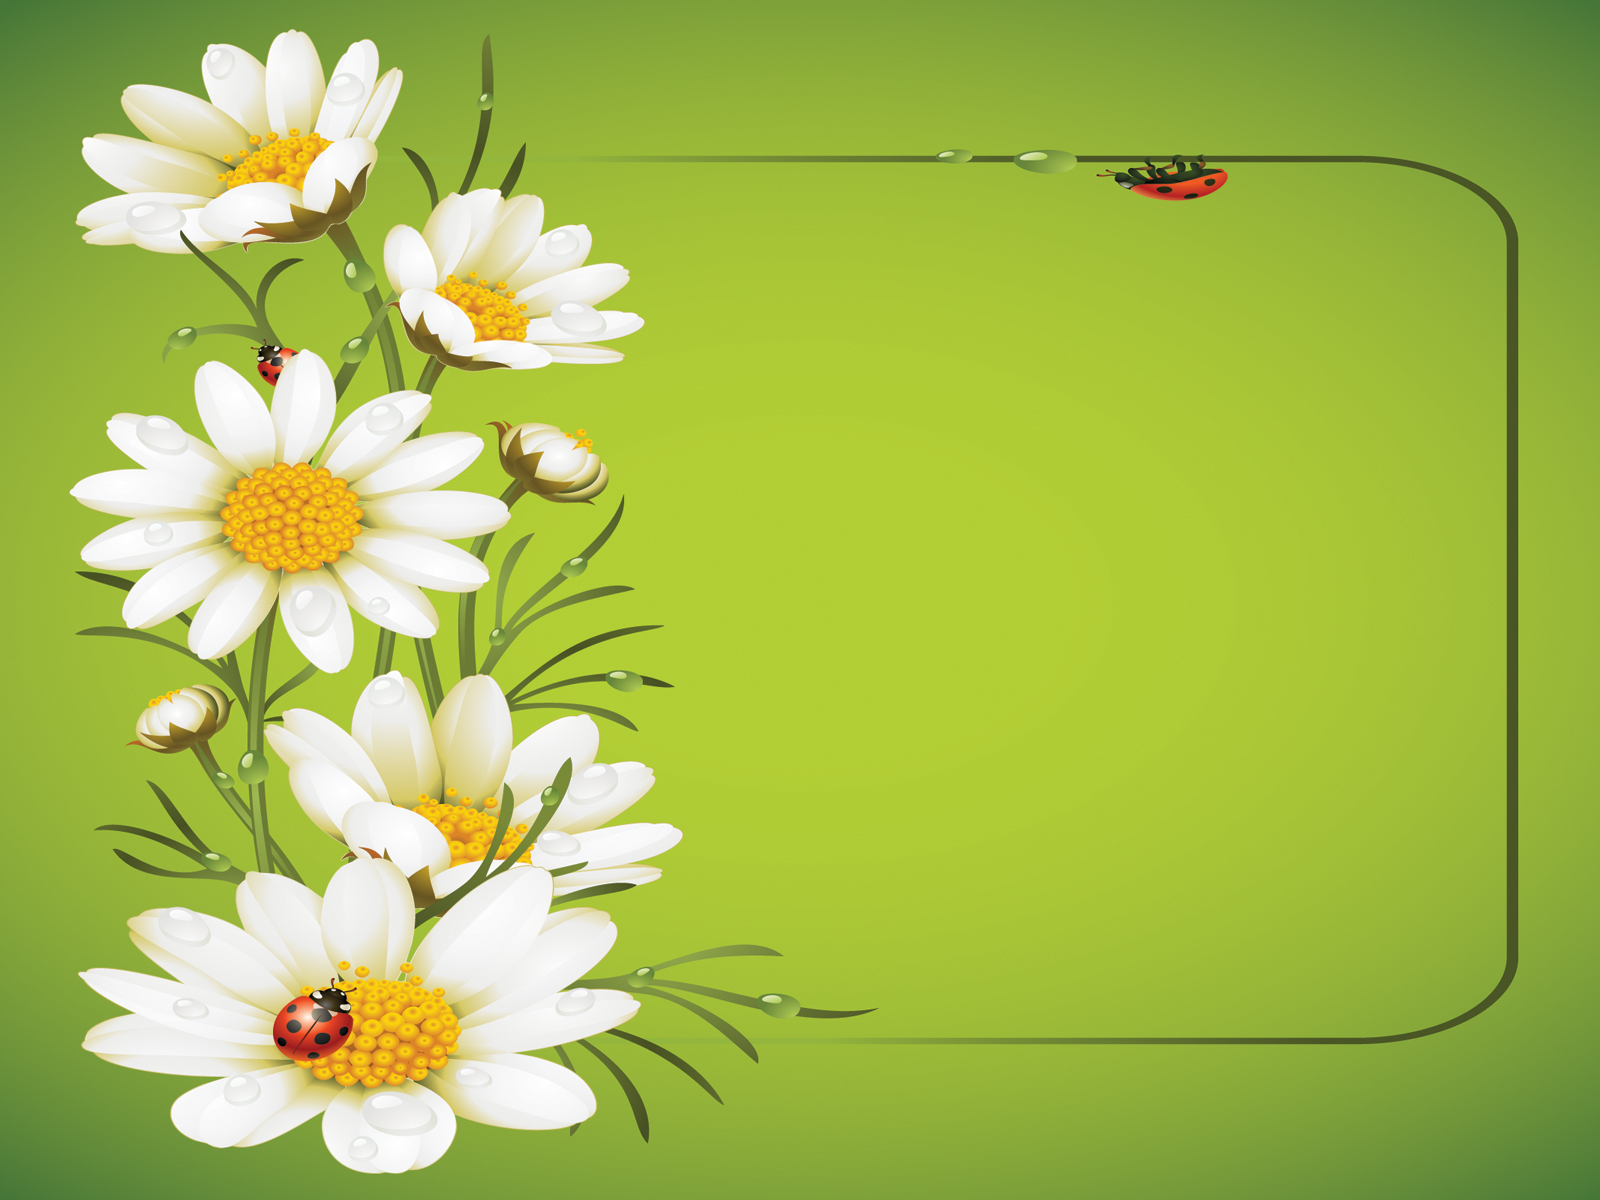 Ladybug and Daisies Backgrounds Flowers, Green, White Templates